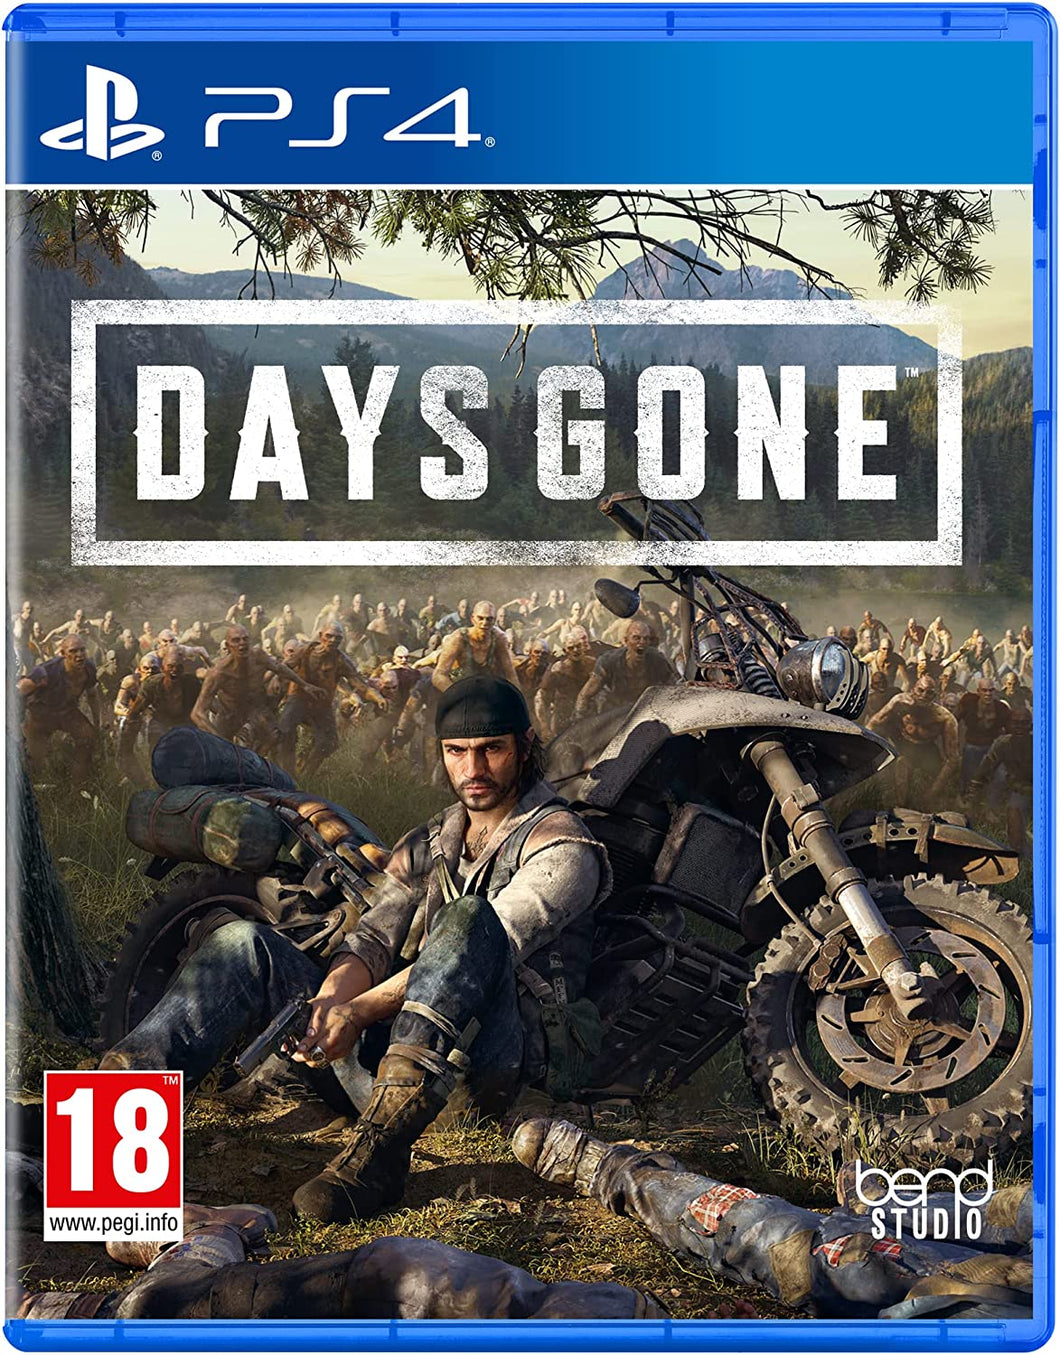 SONY PS4 DAYS GONE GAME